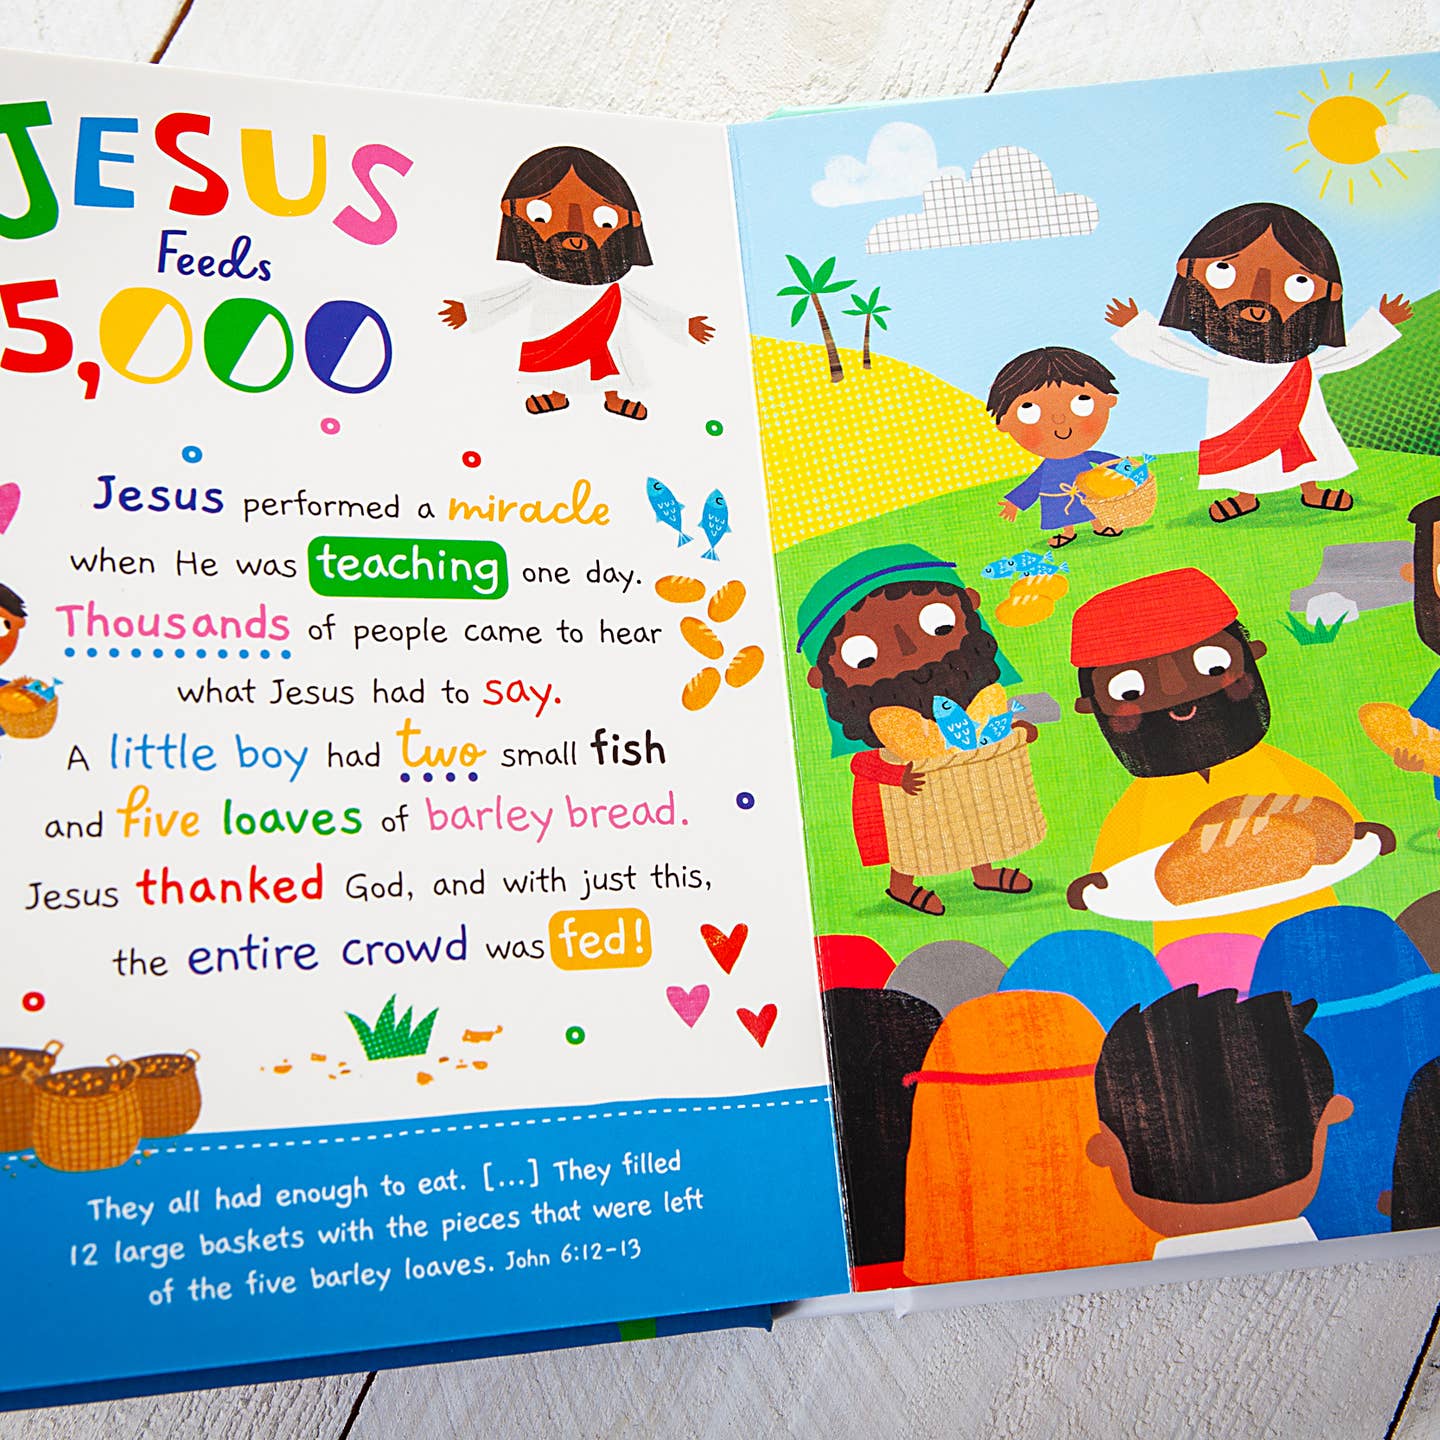 My First Toddler Bible